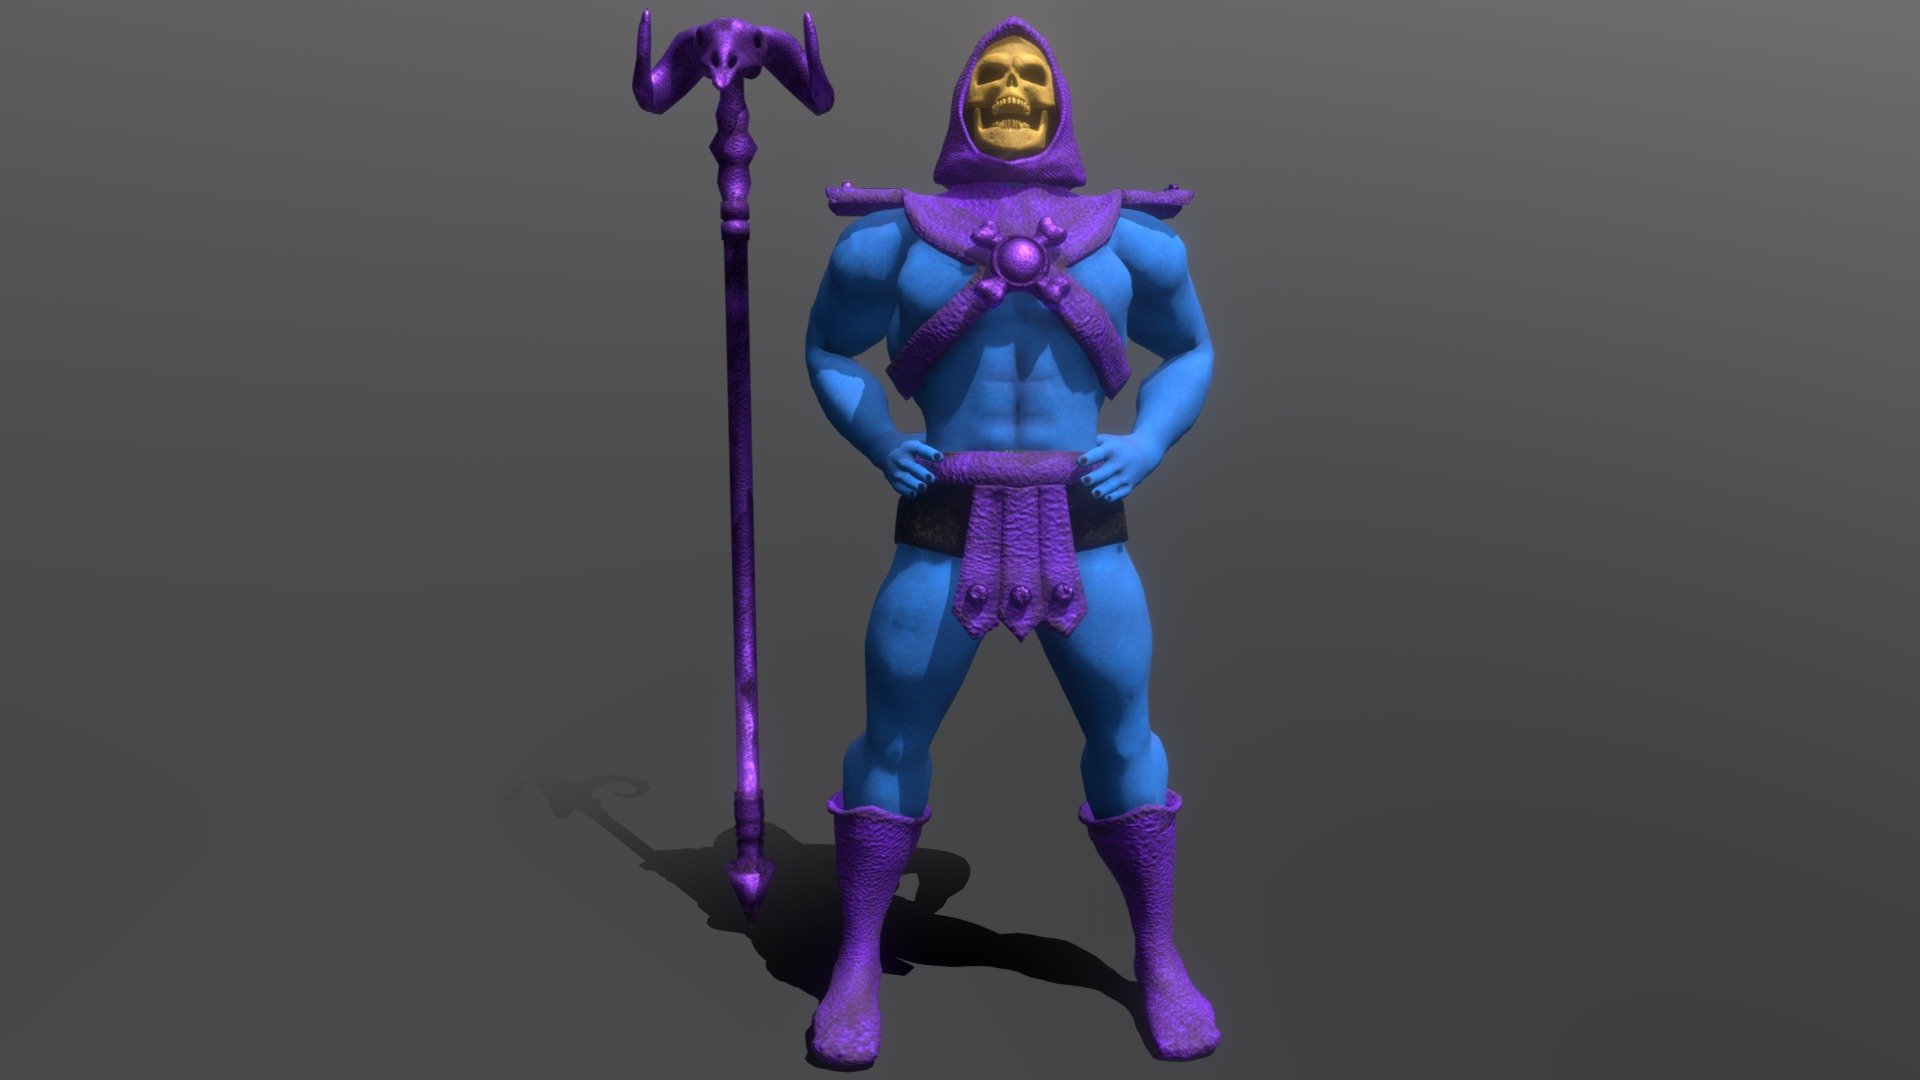 The goal of this project was to keep close to the art style of the original 1980's He-Man show while adding a bit more detail and realism 3d model